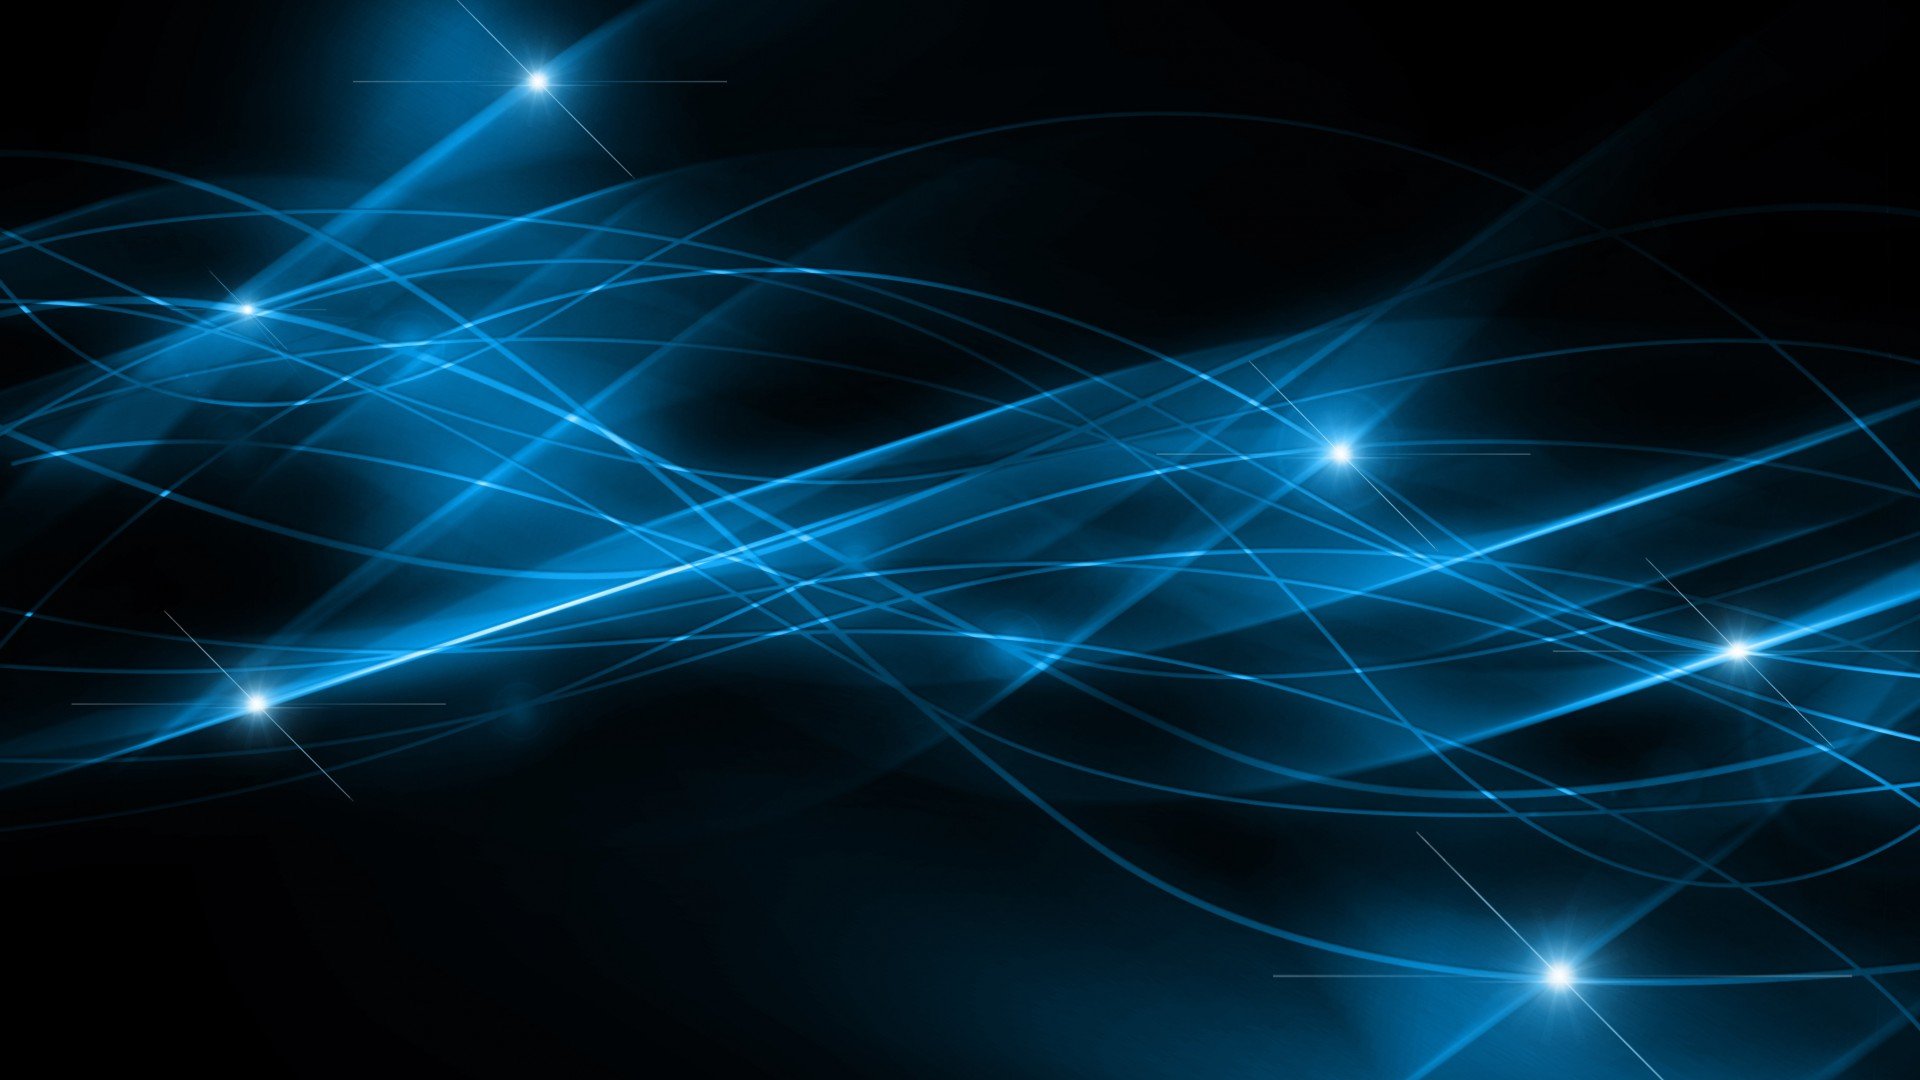 Black And Blue Abstract Backgrounds Hd 1080P 12 HD